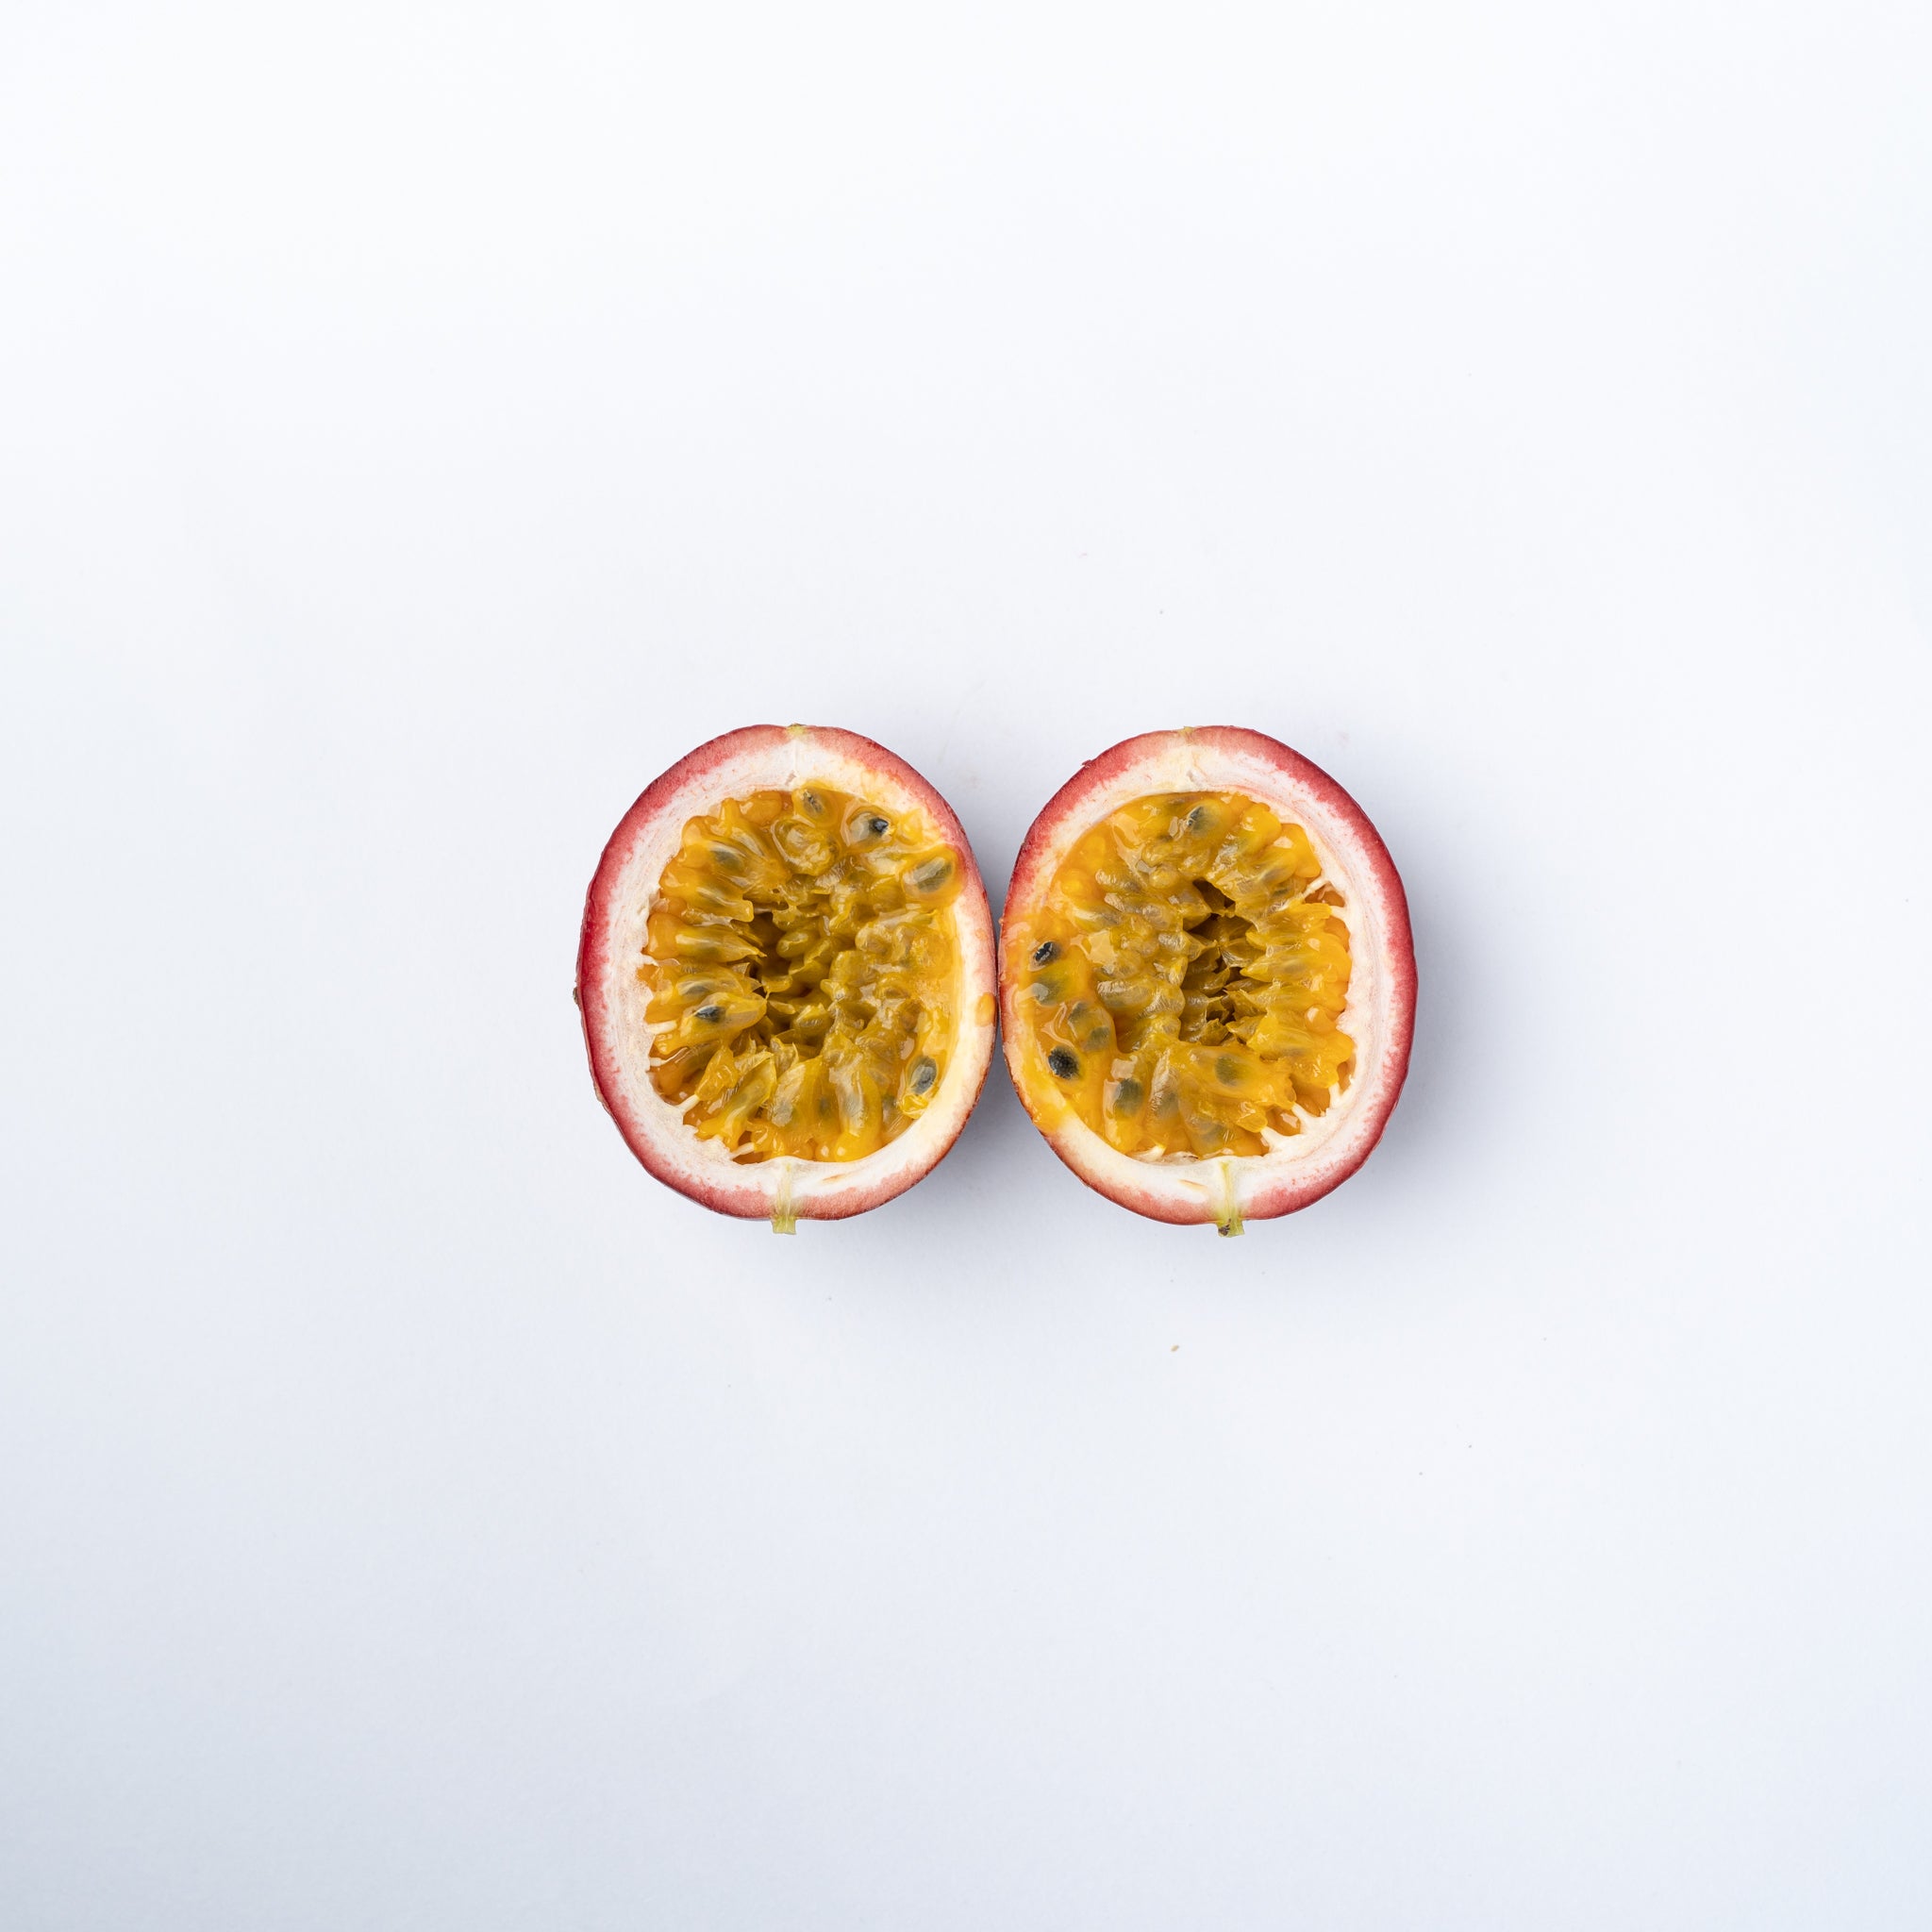 A passion fruit cut in half.